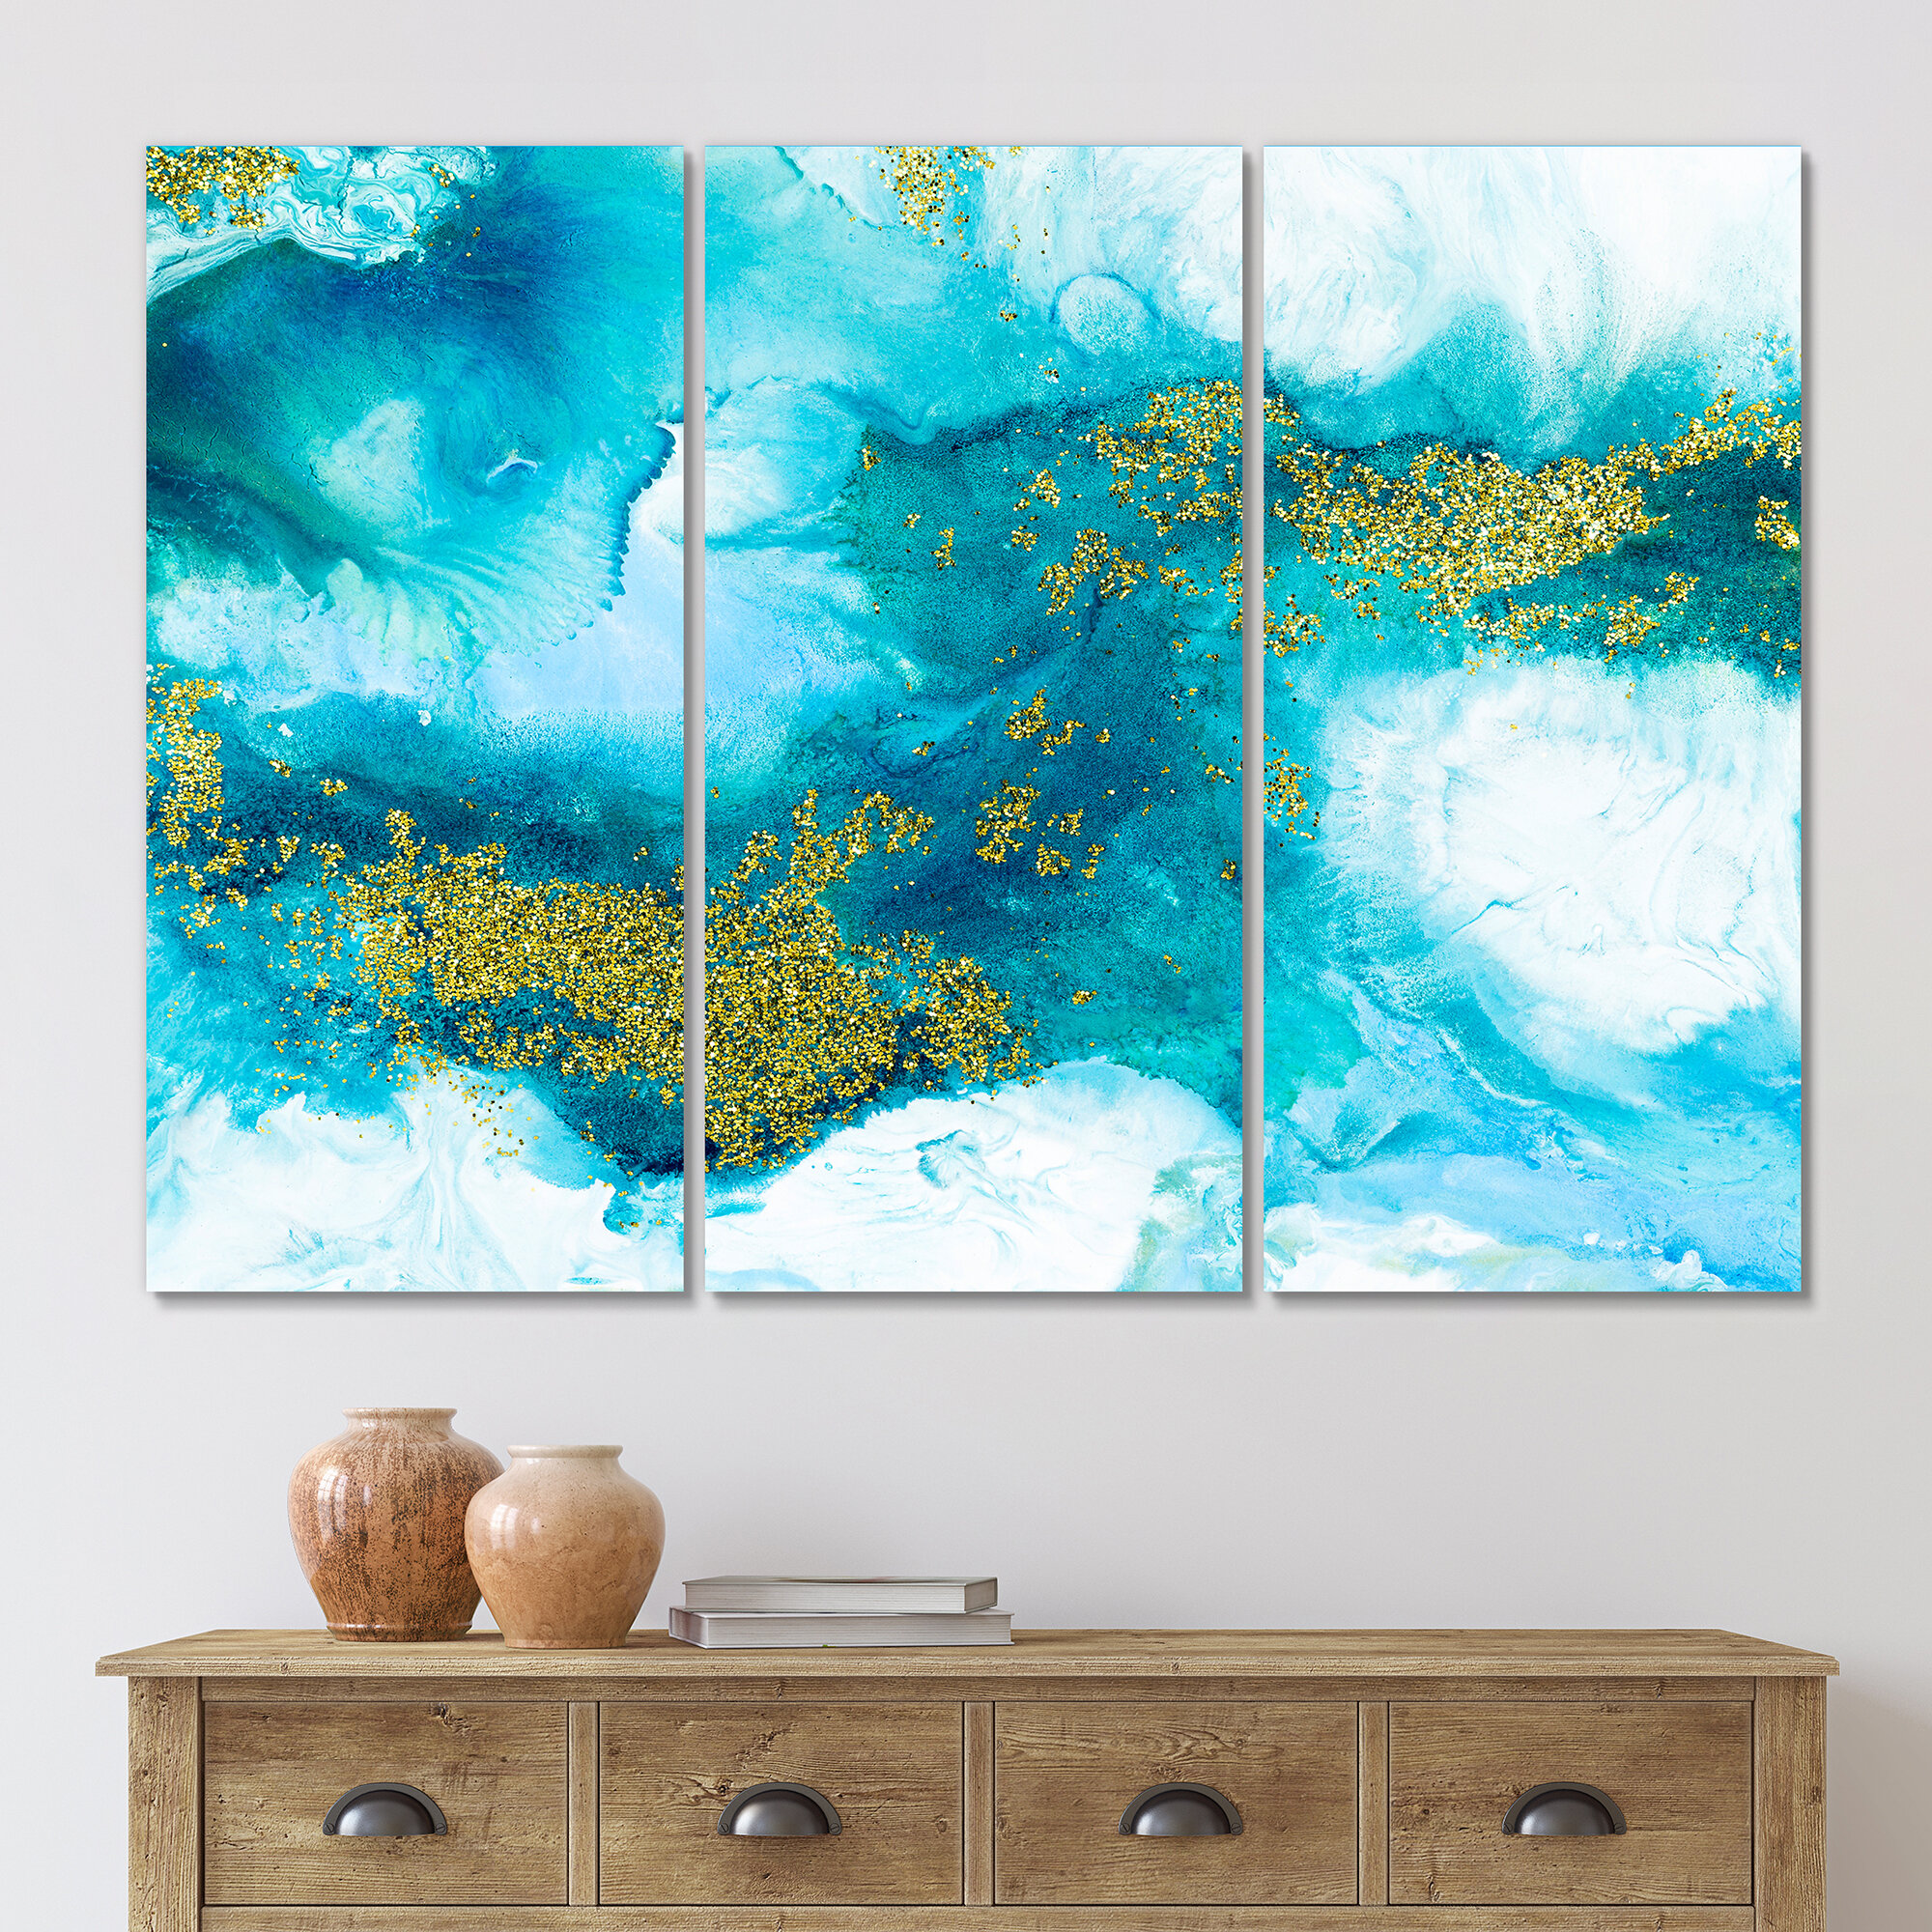 Bless international Light Blue Abstract Acrylic Paint Mix On Metal 5 Pieces  Painting